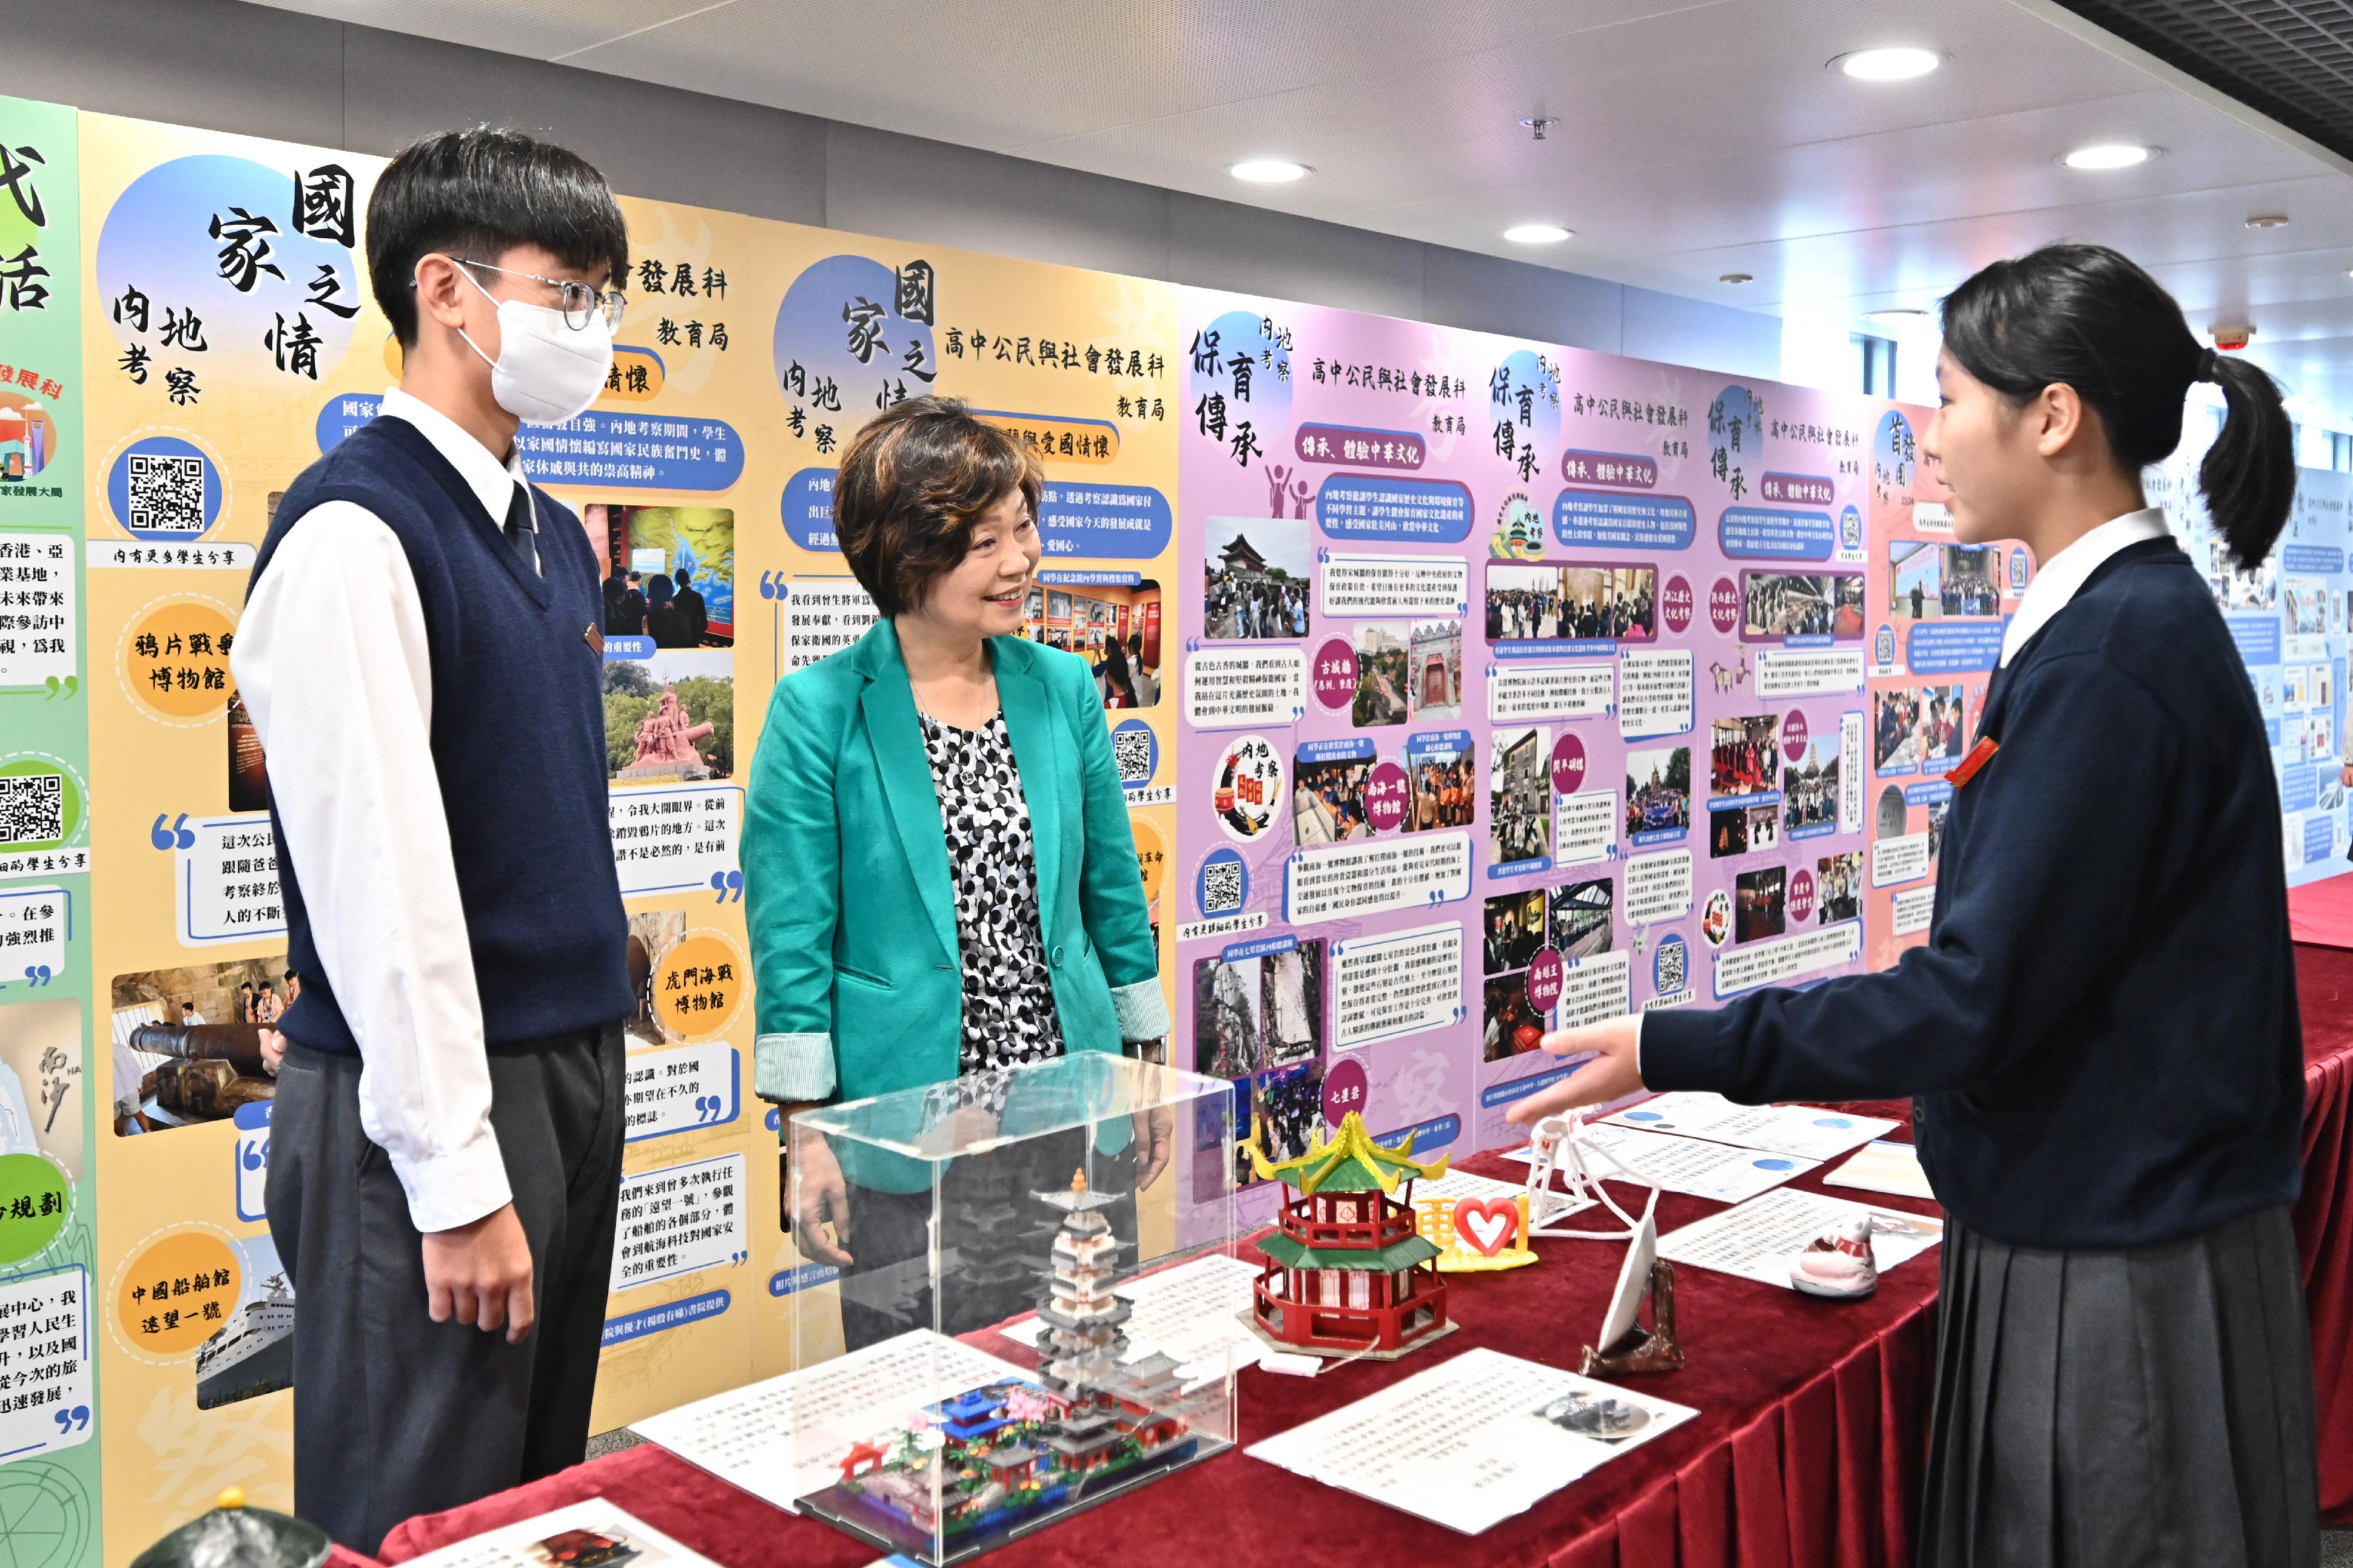 The Education Bureau launched the subject of Citizenship and Social Development Symposium and opening ceremony for the roving exhibition on student learning outcomes of Mainland study tours today (February 6). Photo shows the Secretary for Education, Dr Choi Yuk-lin (centre), touring the exhibition and being briefed by students on their learning outcomes of Mainland study tours.
